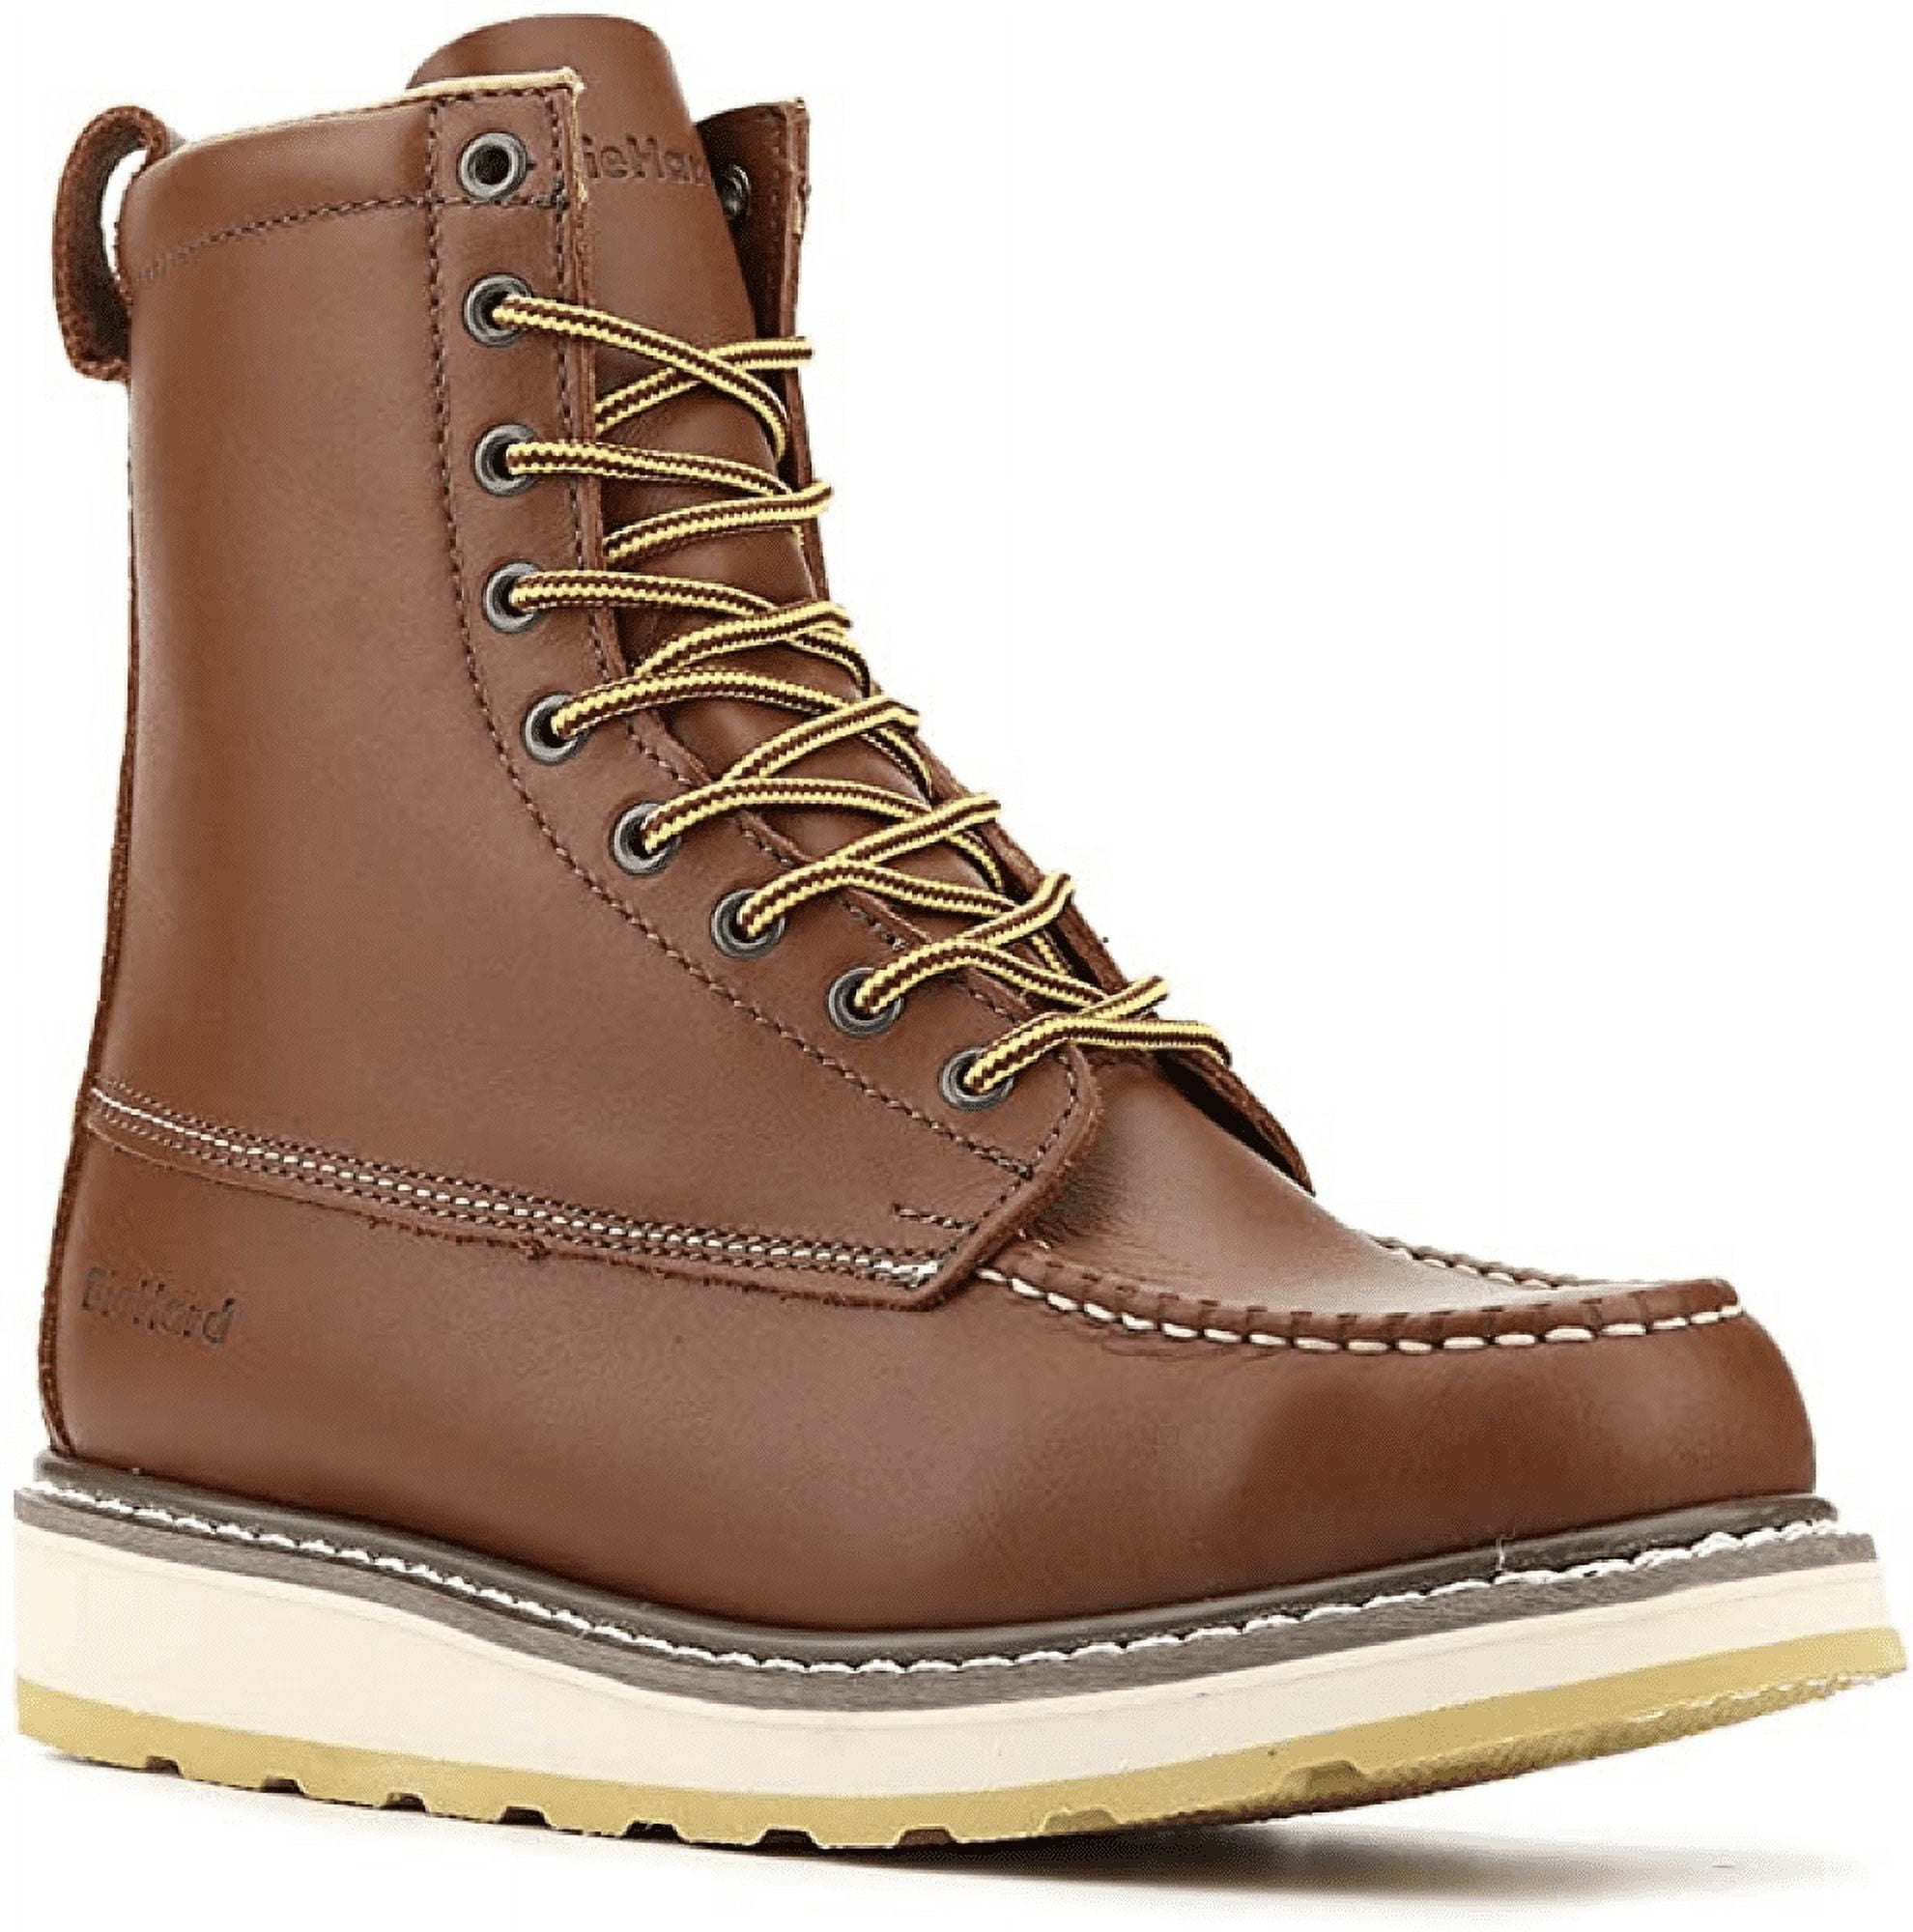 EVER BOOTS Tank Mens Soft Toe Oil Full Grain Leather India